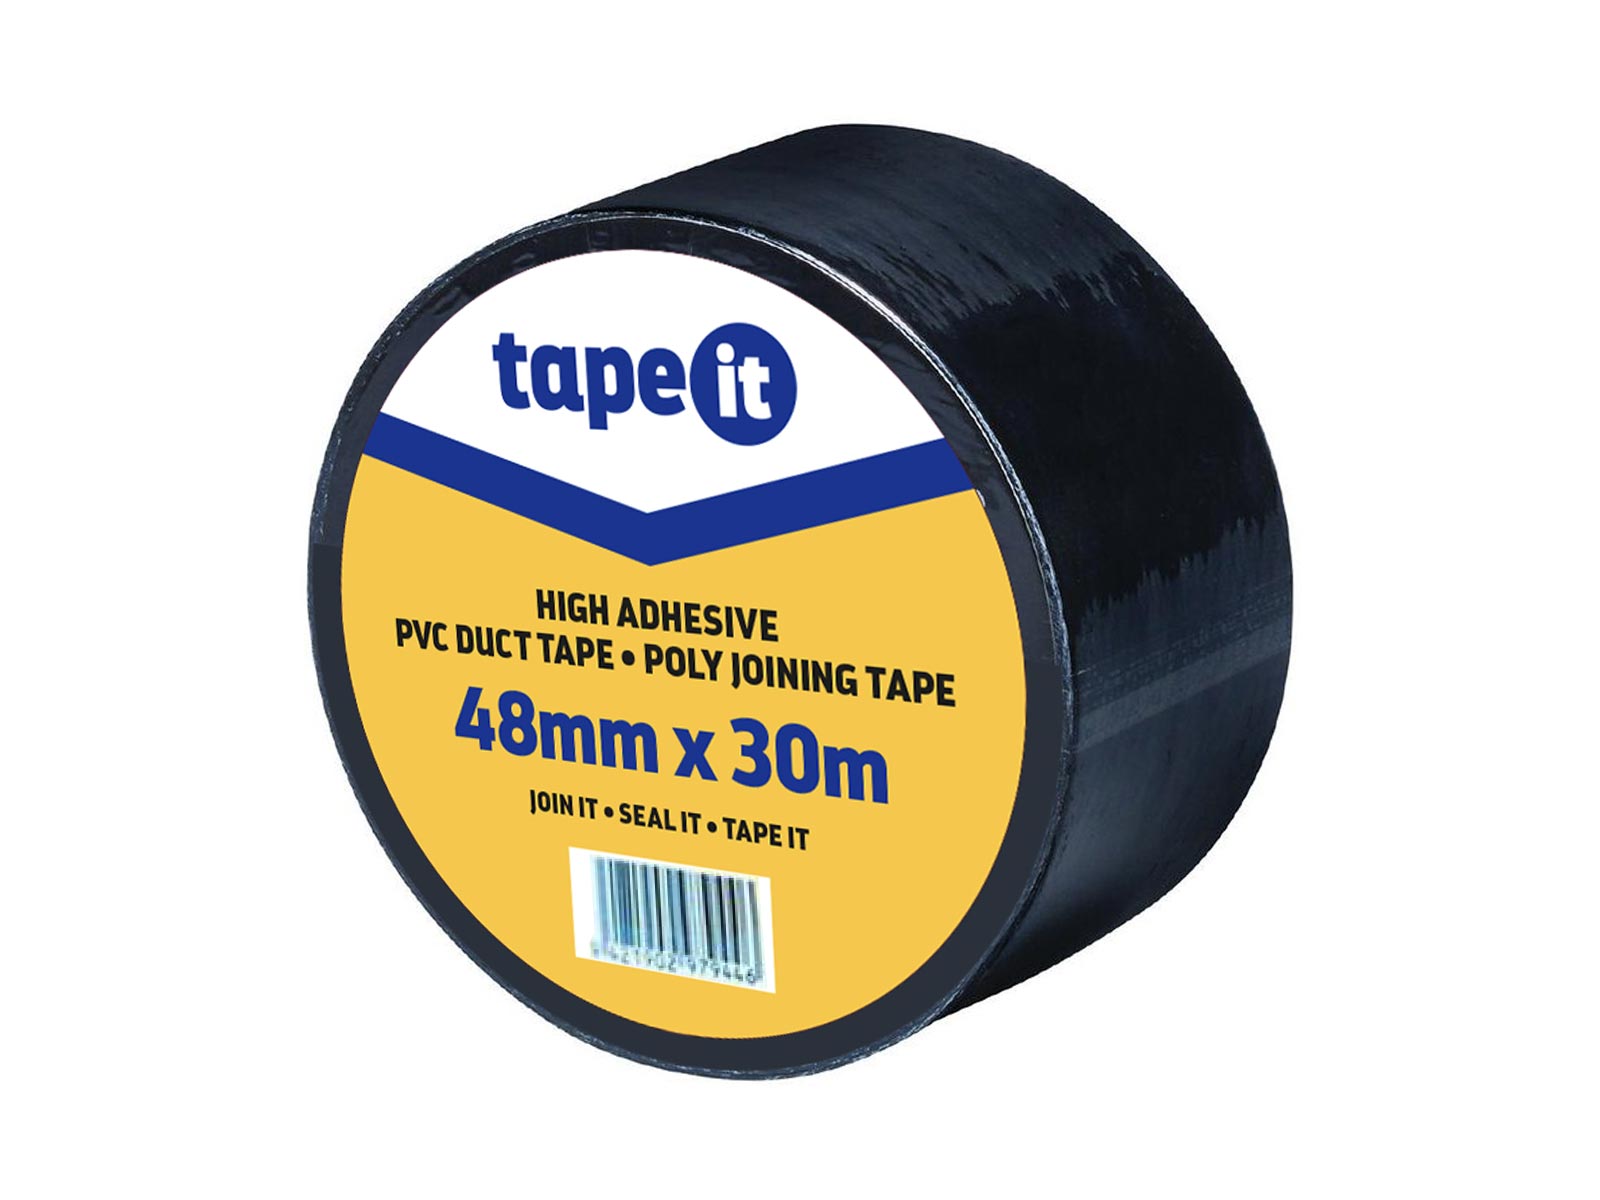 tape-it-high-adhesive-pvc-duct-tape